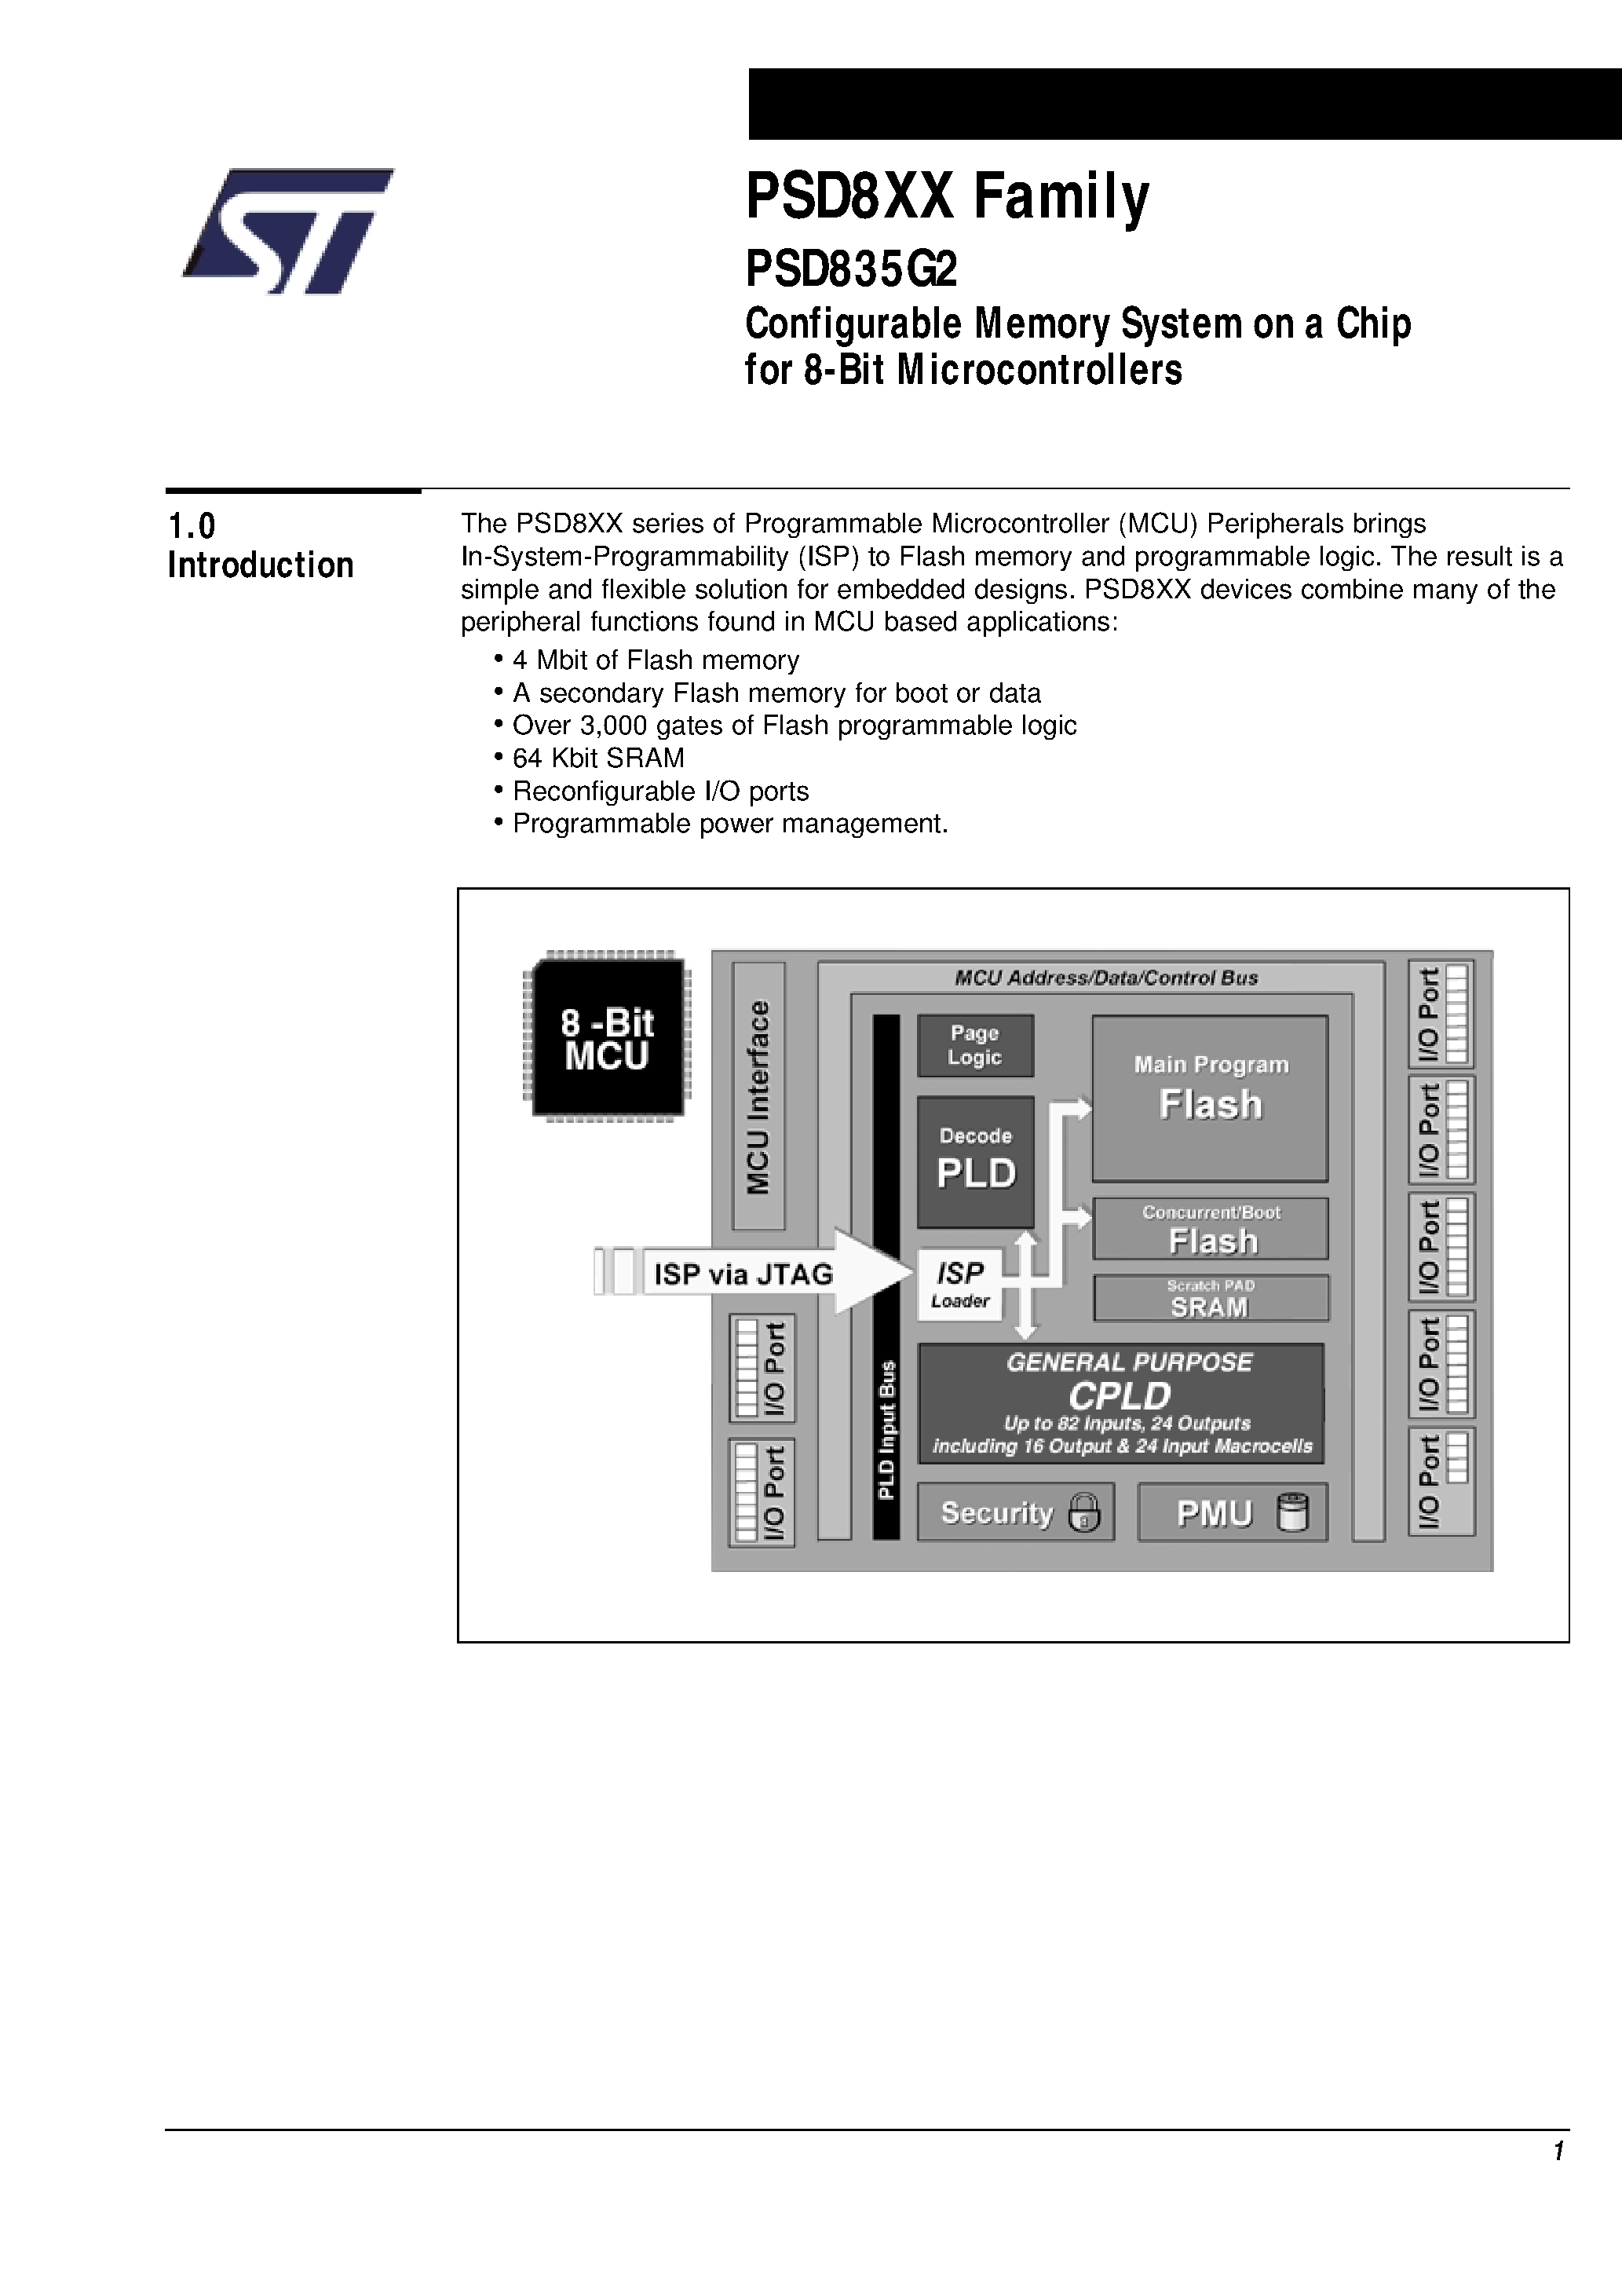 Datasheet PSD835F2-A-20J - Configurable Memory System on a Chip for 8-Bit Microcontrollers page 2